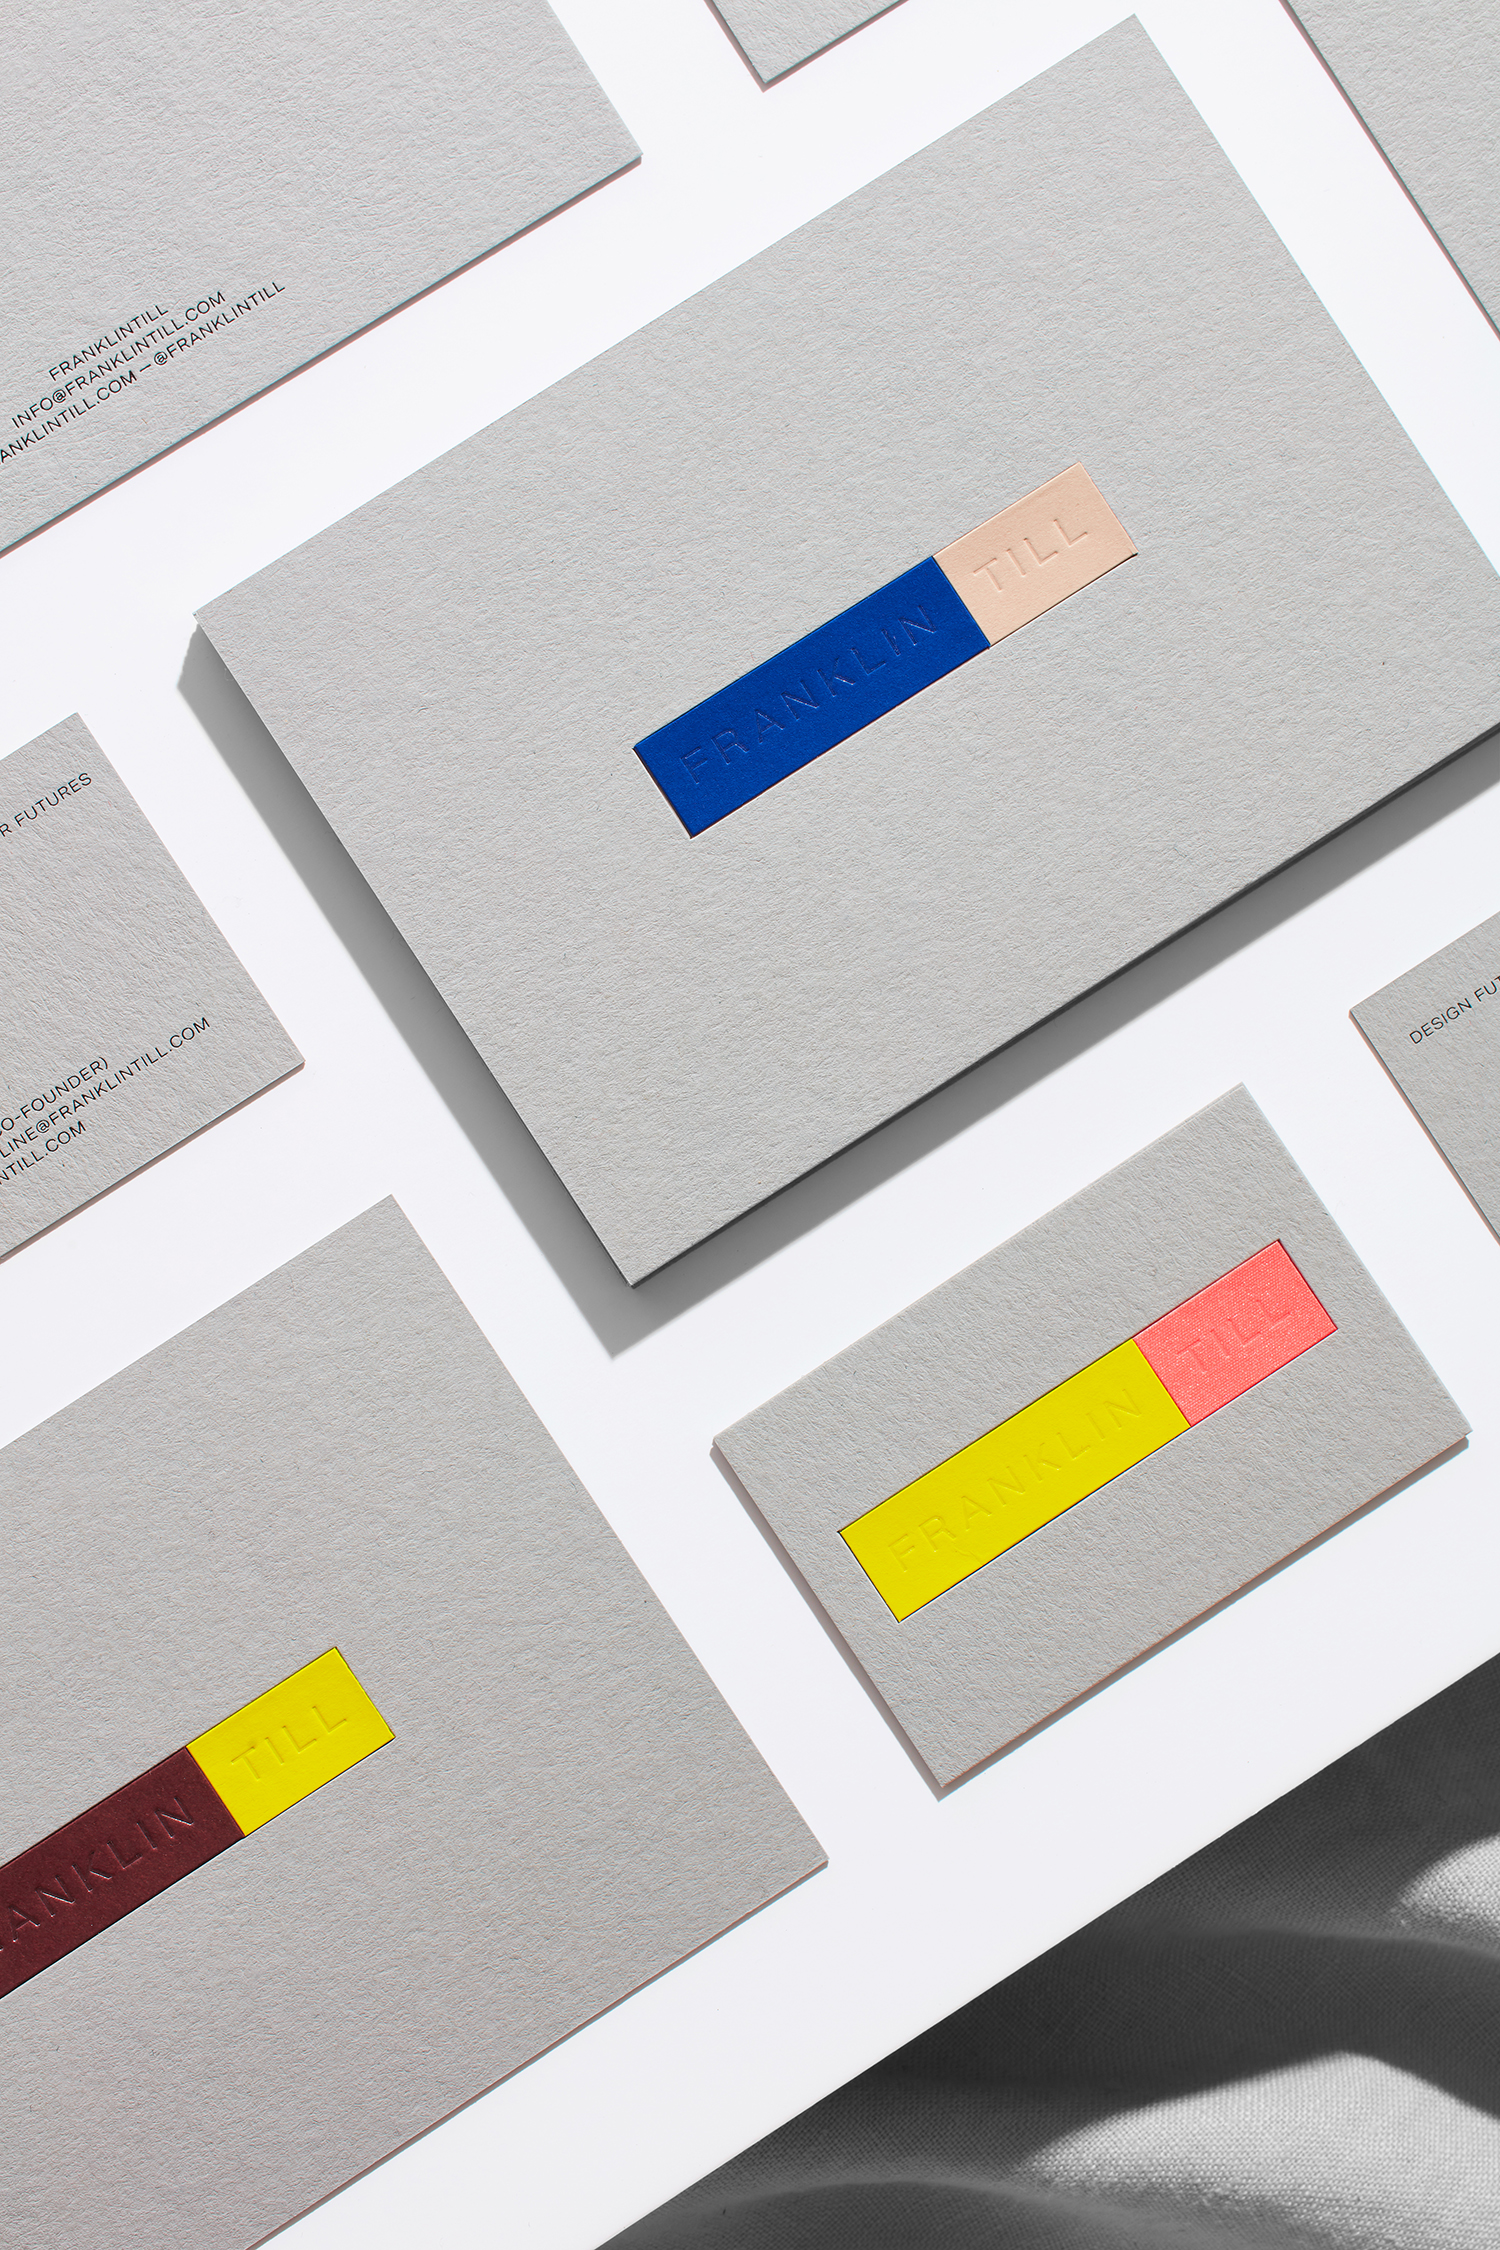 Graphic identity and paper marquetry business cards and stationery by Commission for futures research agency FranklinTill